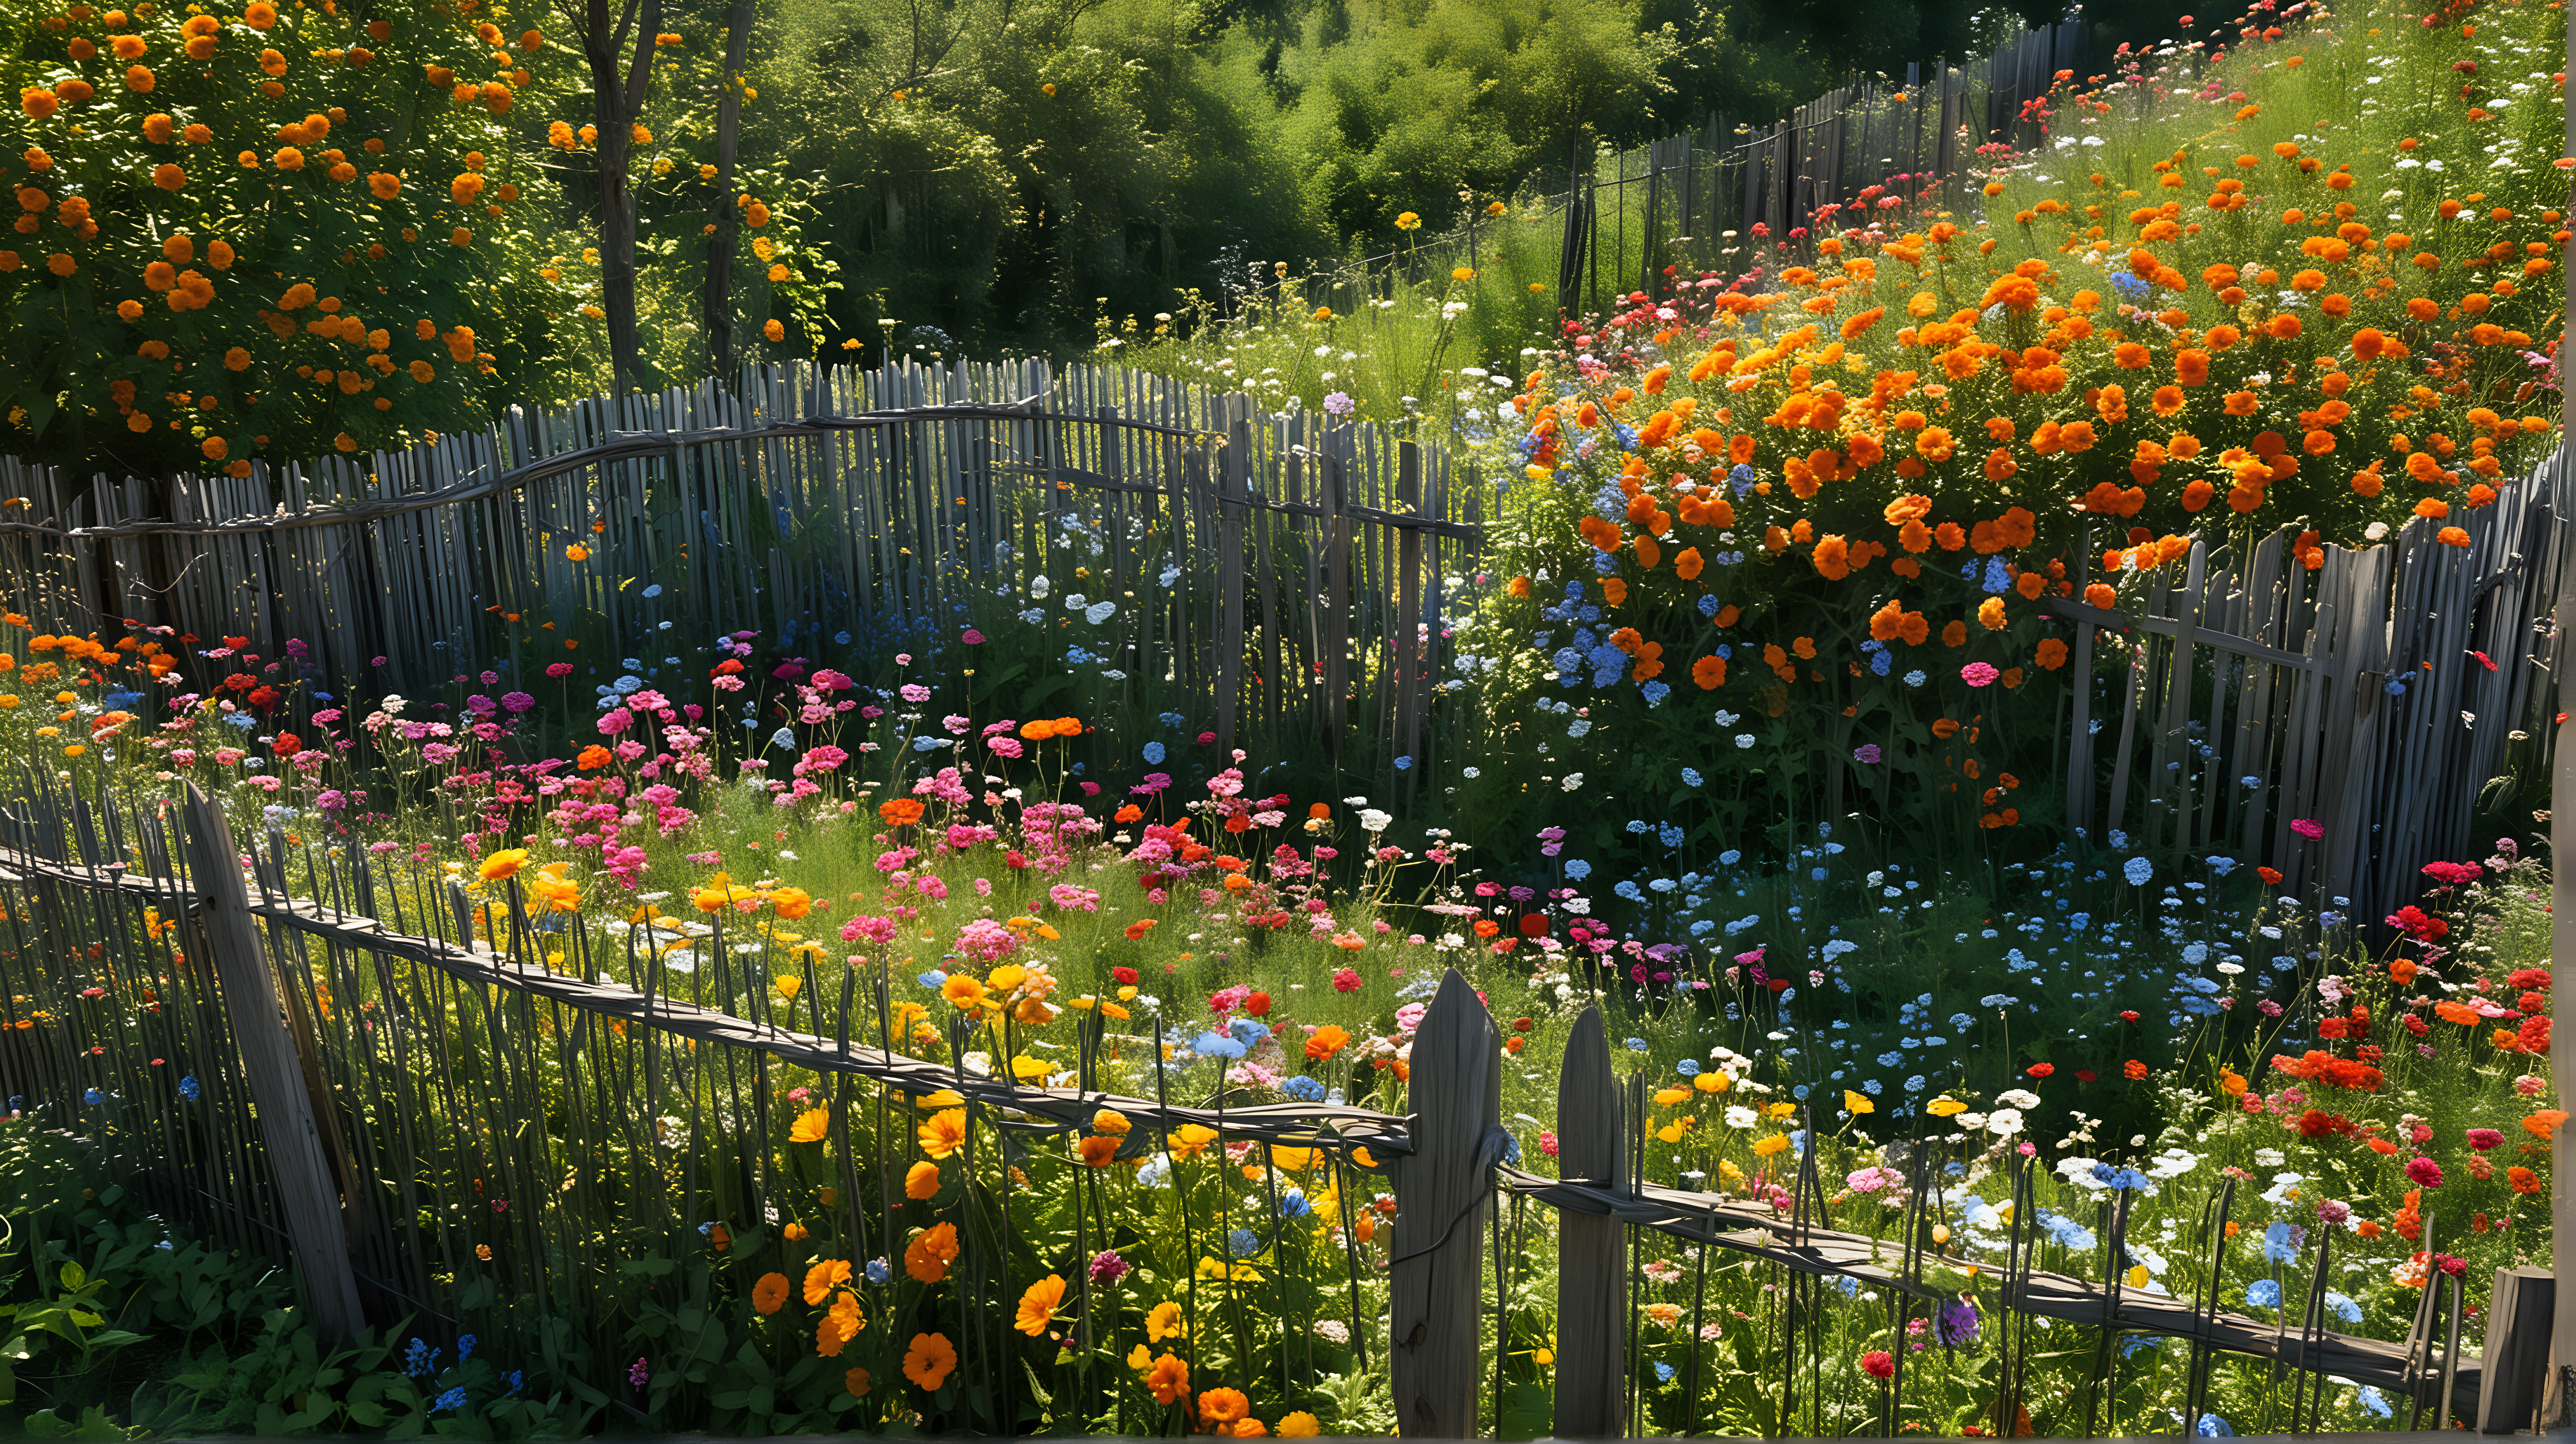 a wild garden full of colourful flowers surrounded by a rotten fence, distant view from a high tree, sunny